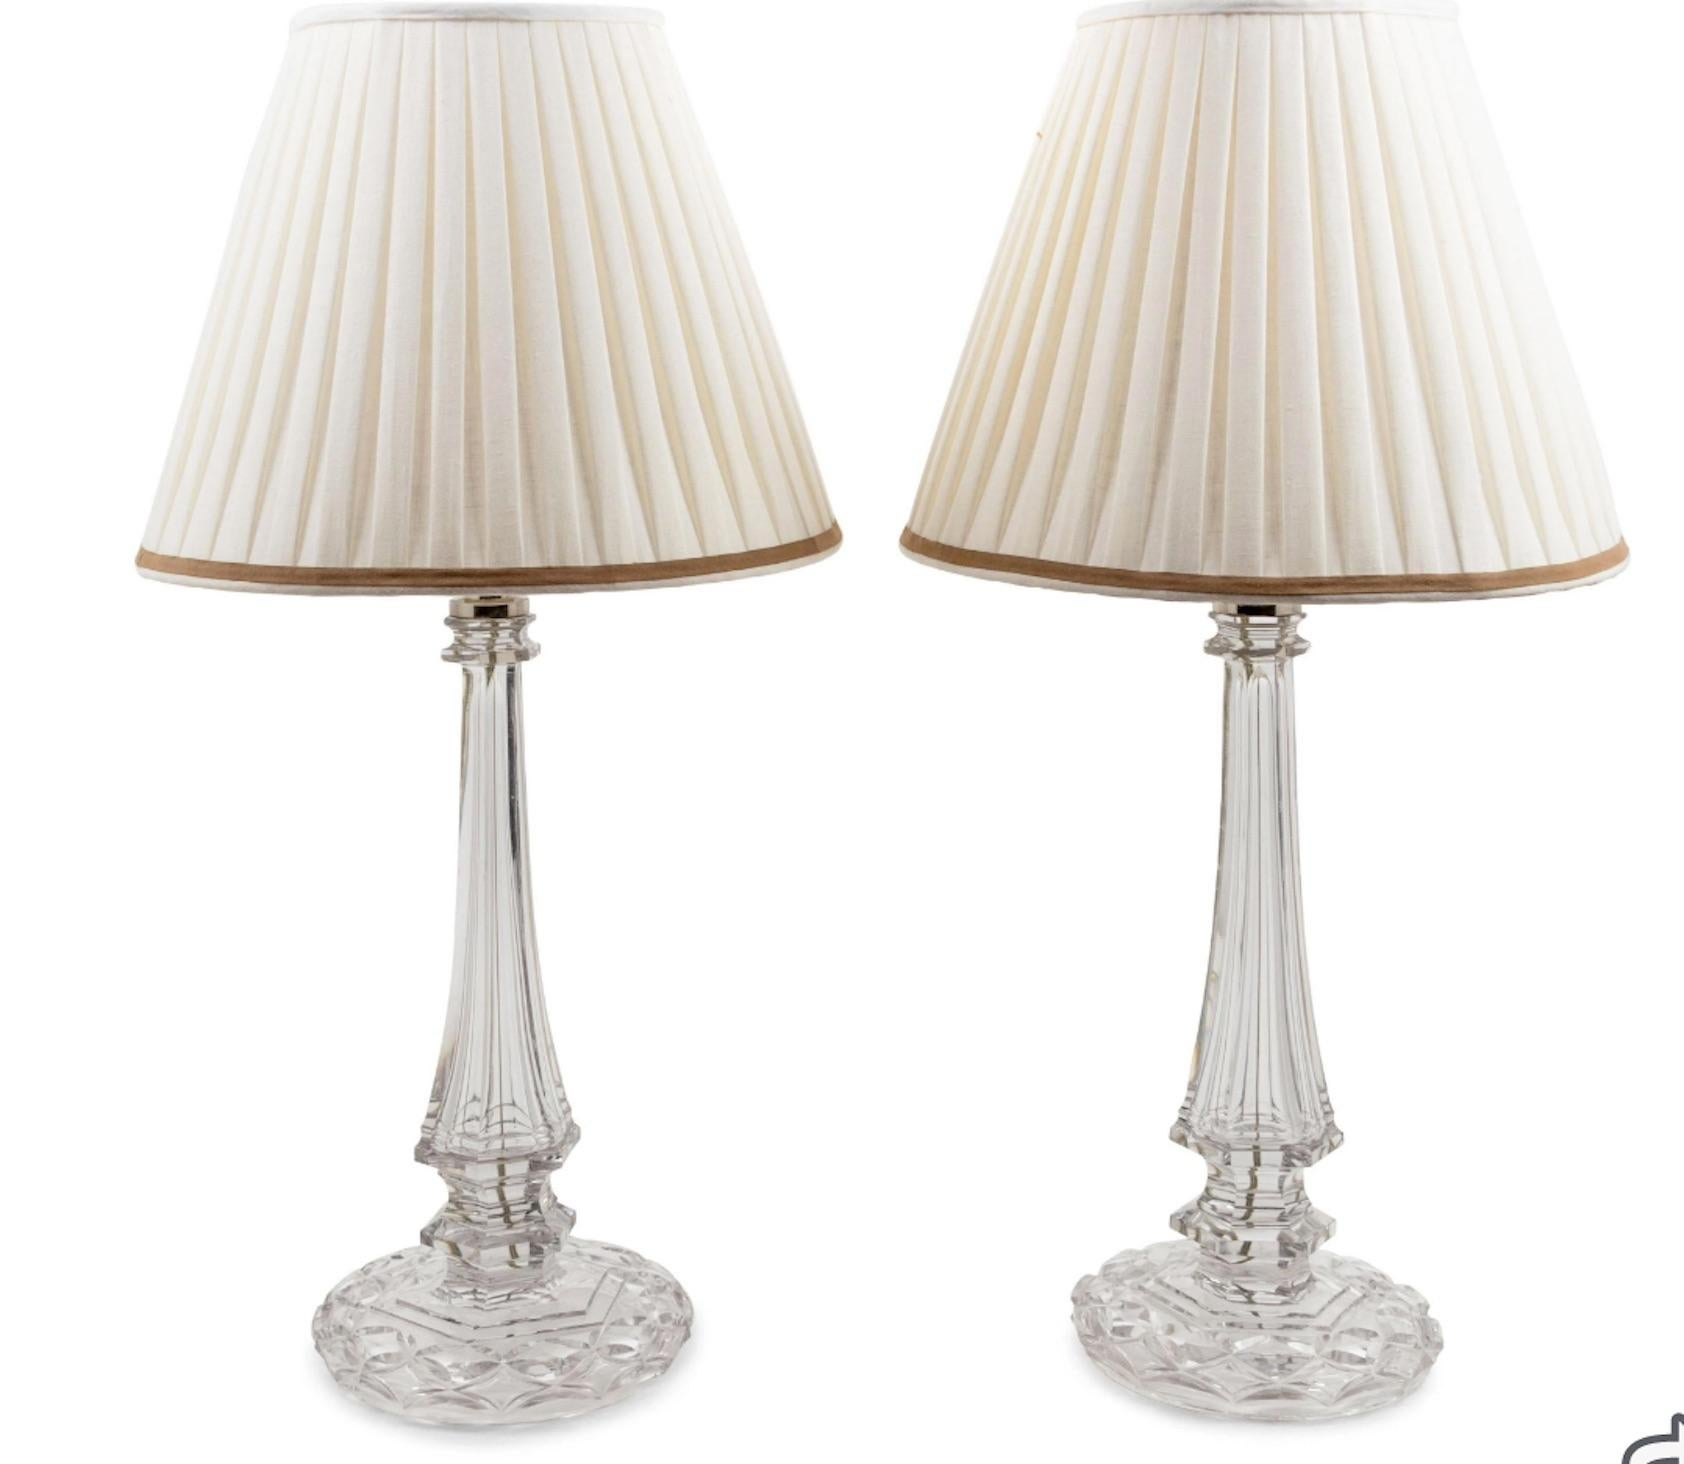 Regency Pair of Cut Glass Lamps 19th Century, Property of an Important Collection For Sale